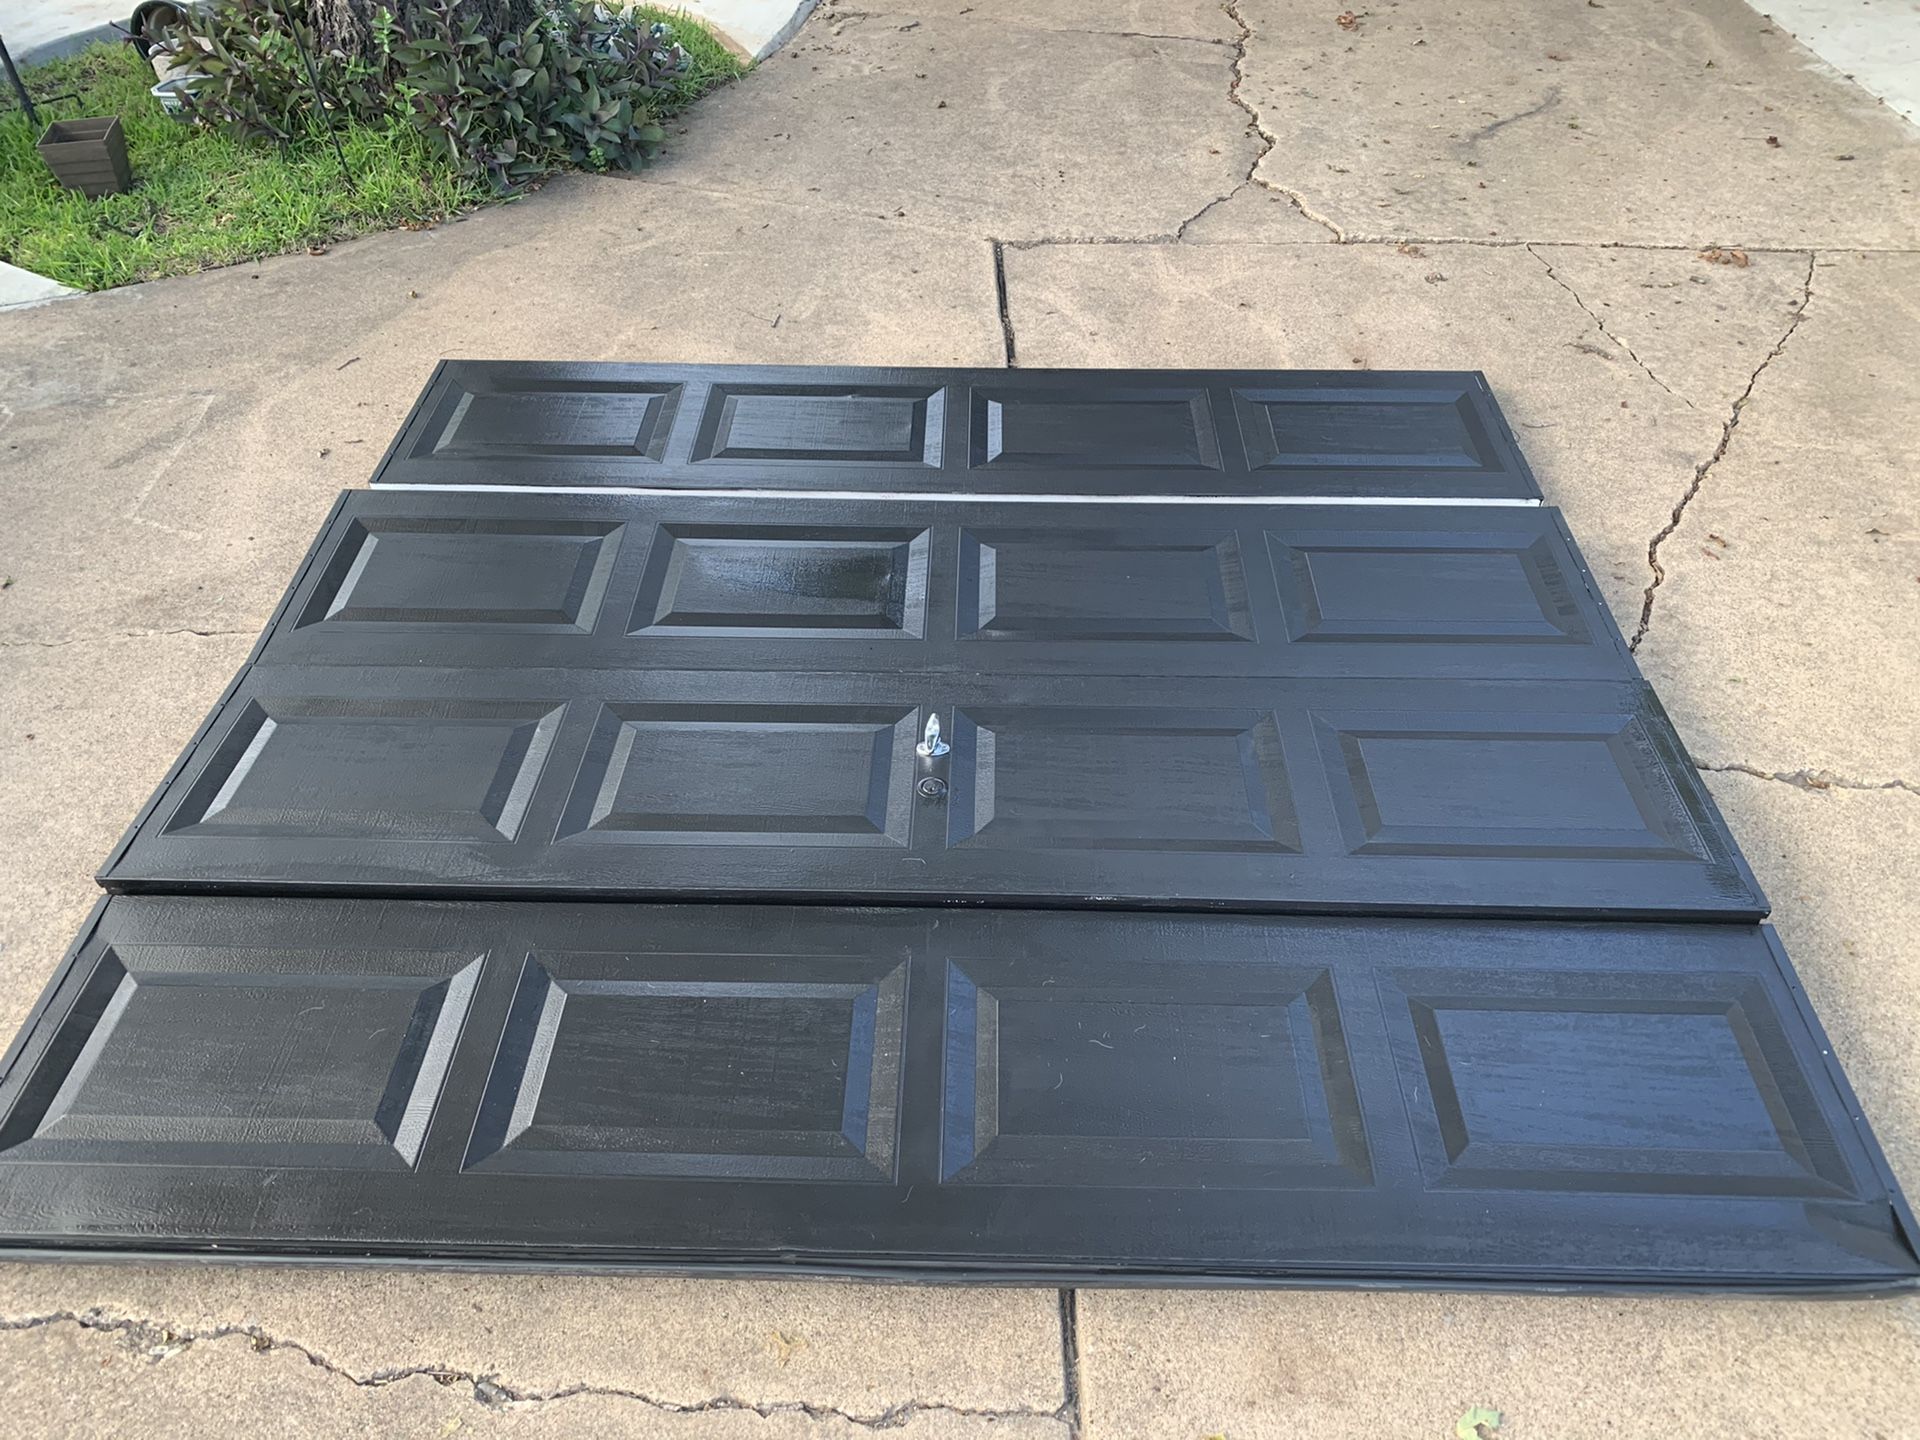 Used single car garage doors I have (2) painted black with all hardware and rails